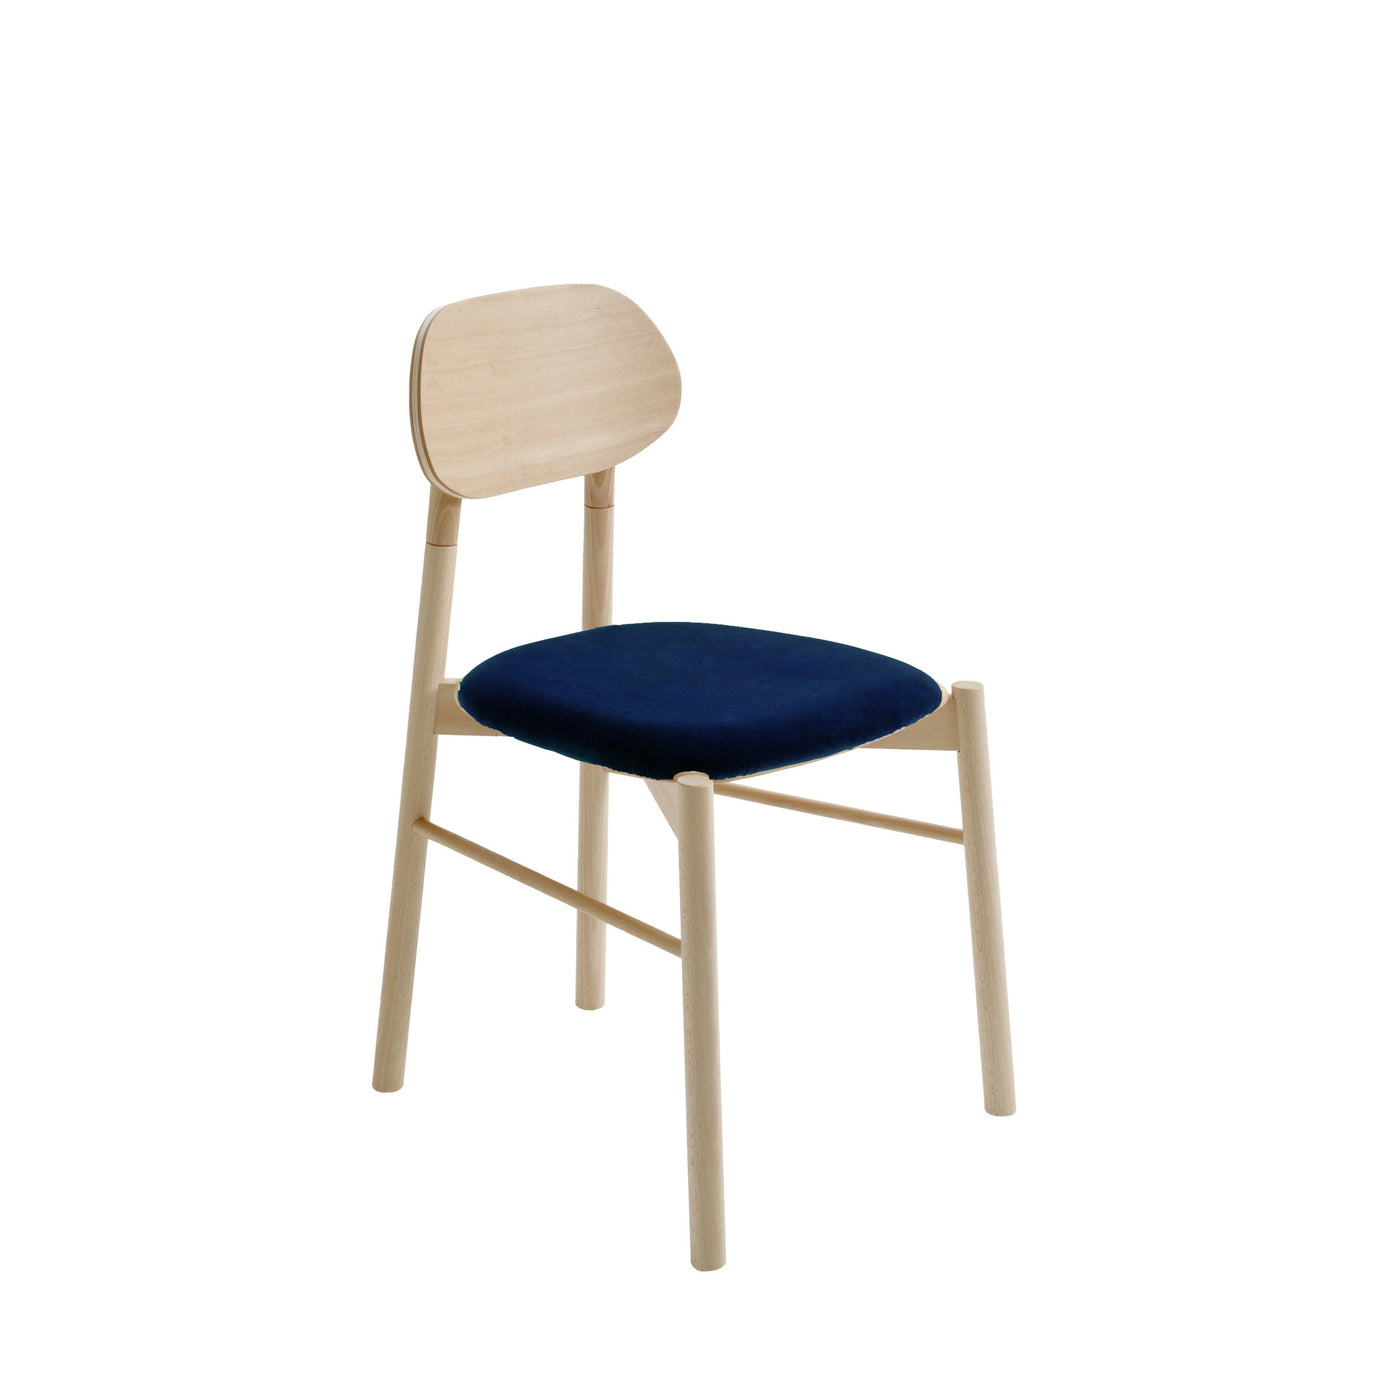 Upholstered Dining Chair BOKKEN by Bellavista + Piccini for Colé Italia 01